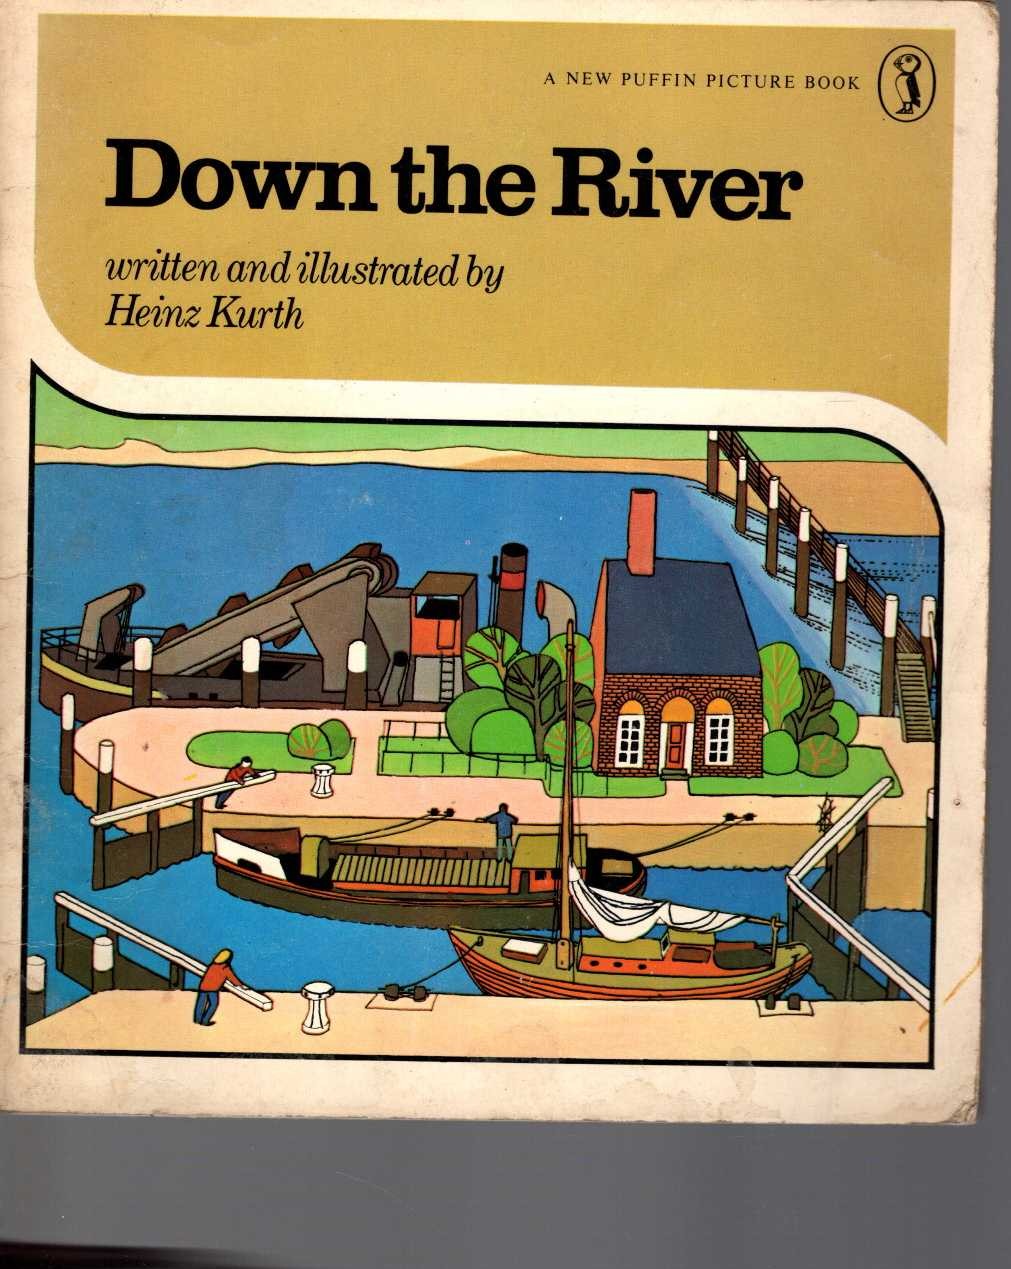 Heinz Kurth  DOWN THE RIVER front book cover image